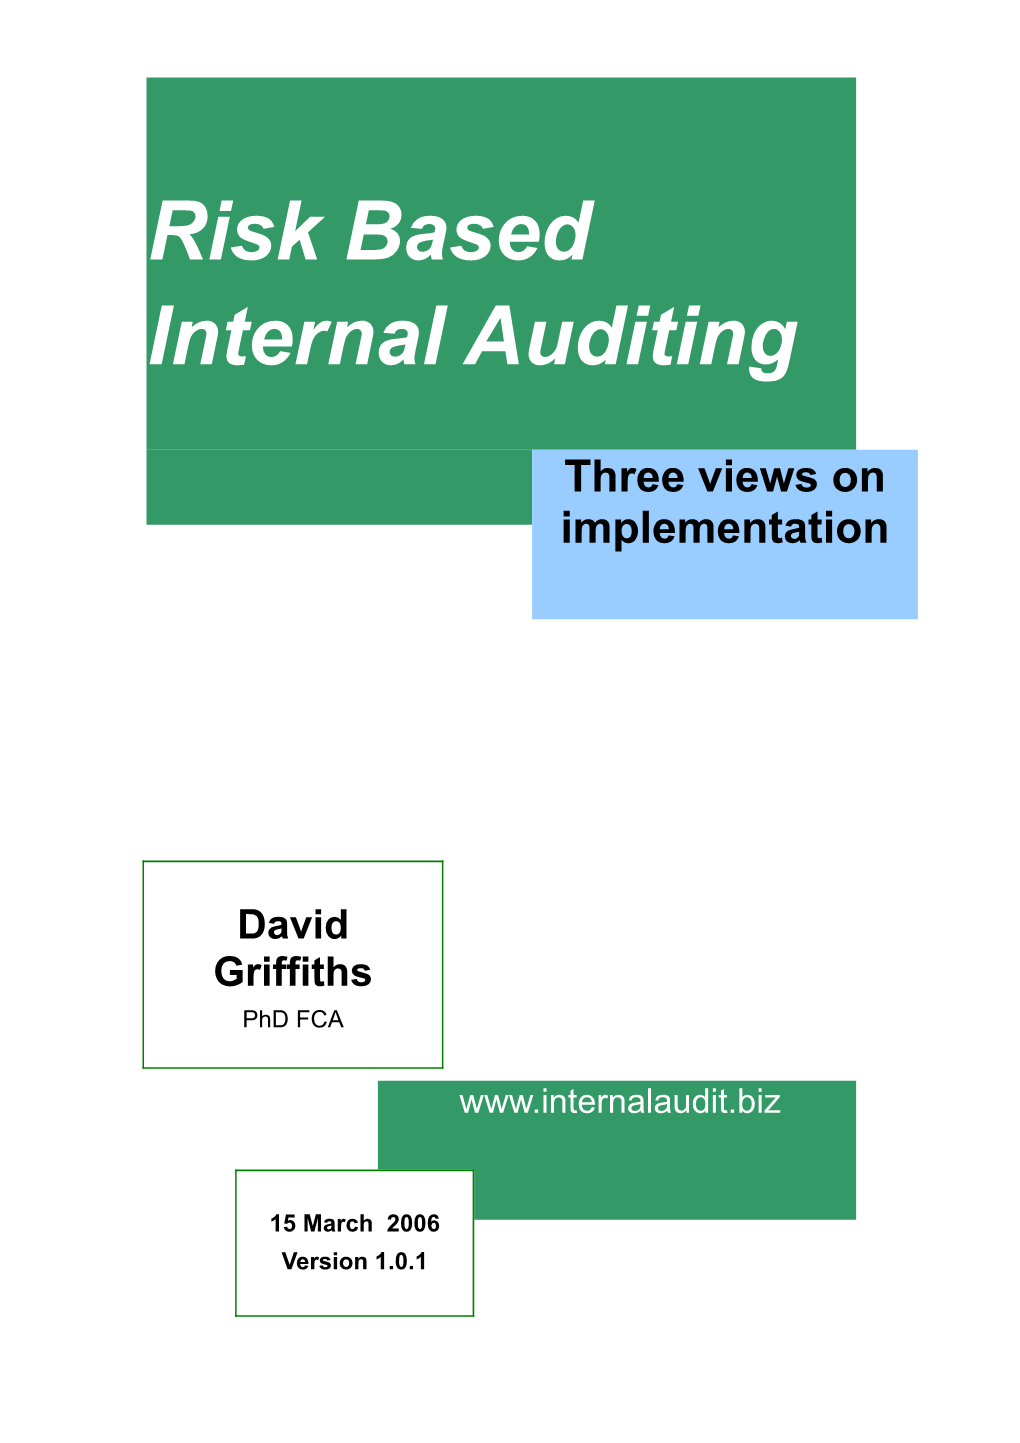 Risk Based Internal Auditing - Three Views on Implementation